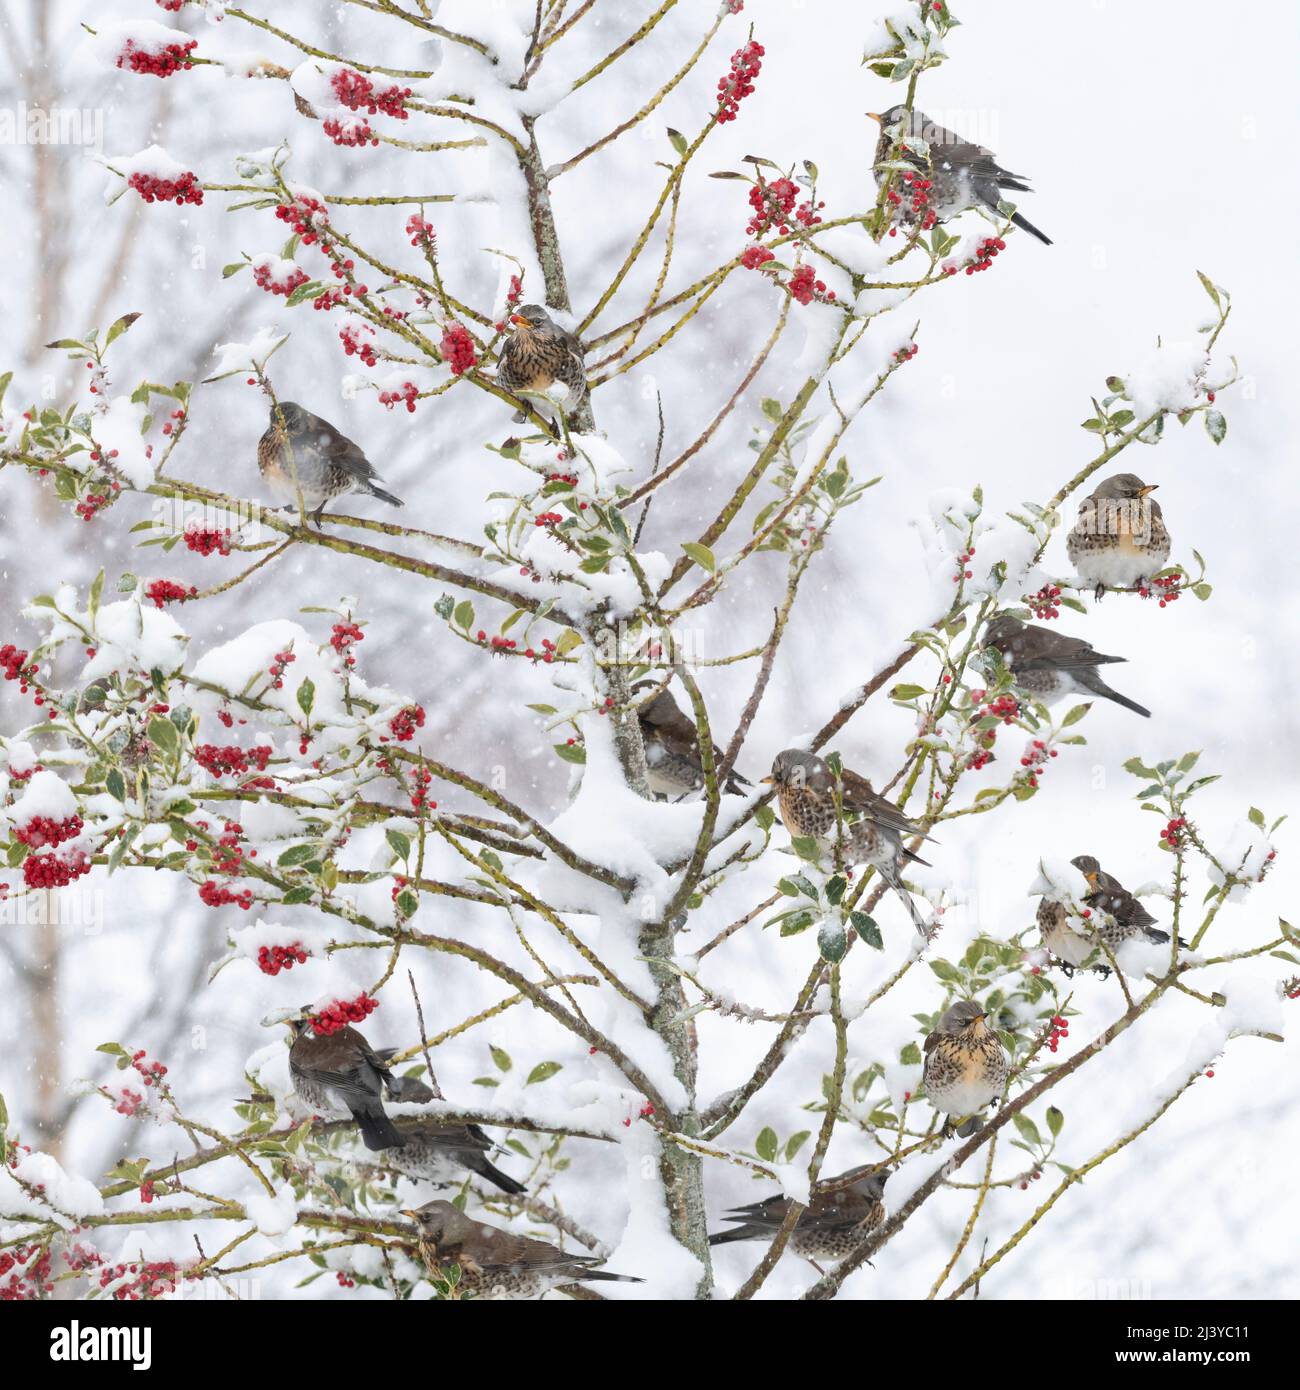 A Flock of Fieldfare (Turdus Pilaris) Feasting on the Red Berries of a Holly Tree (Ilex Aquifolium) During a Winter Snow Shower Stock Photo